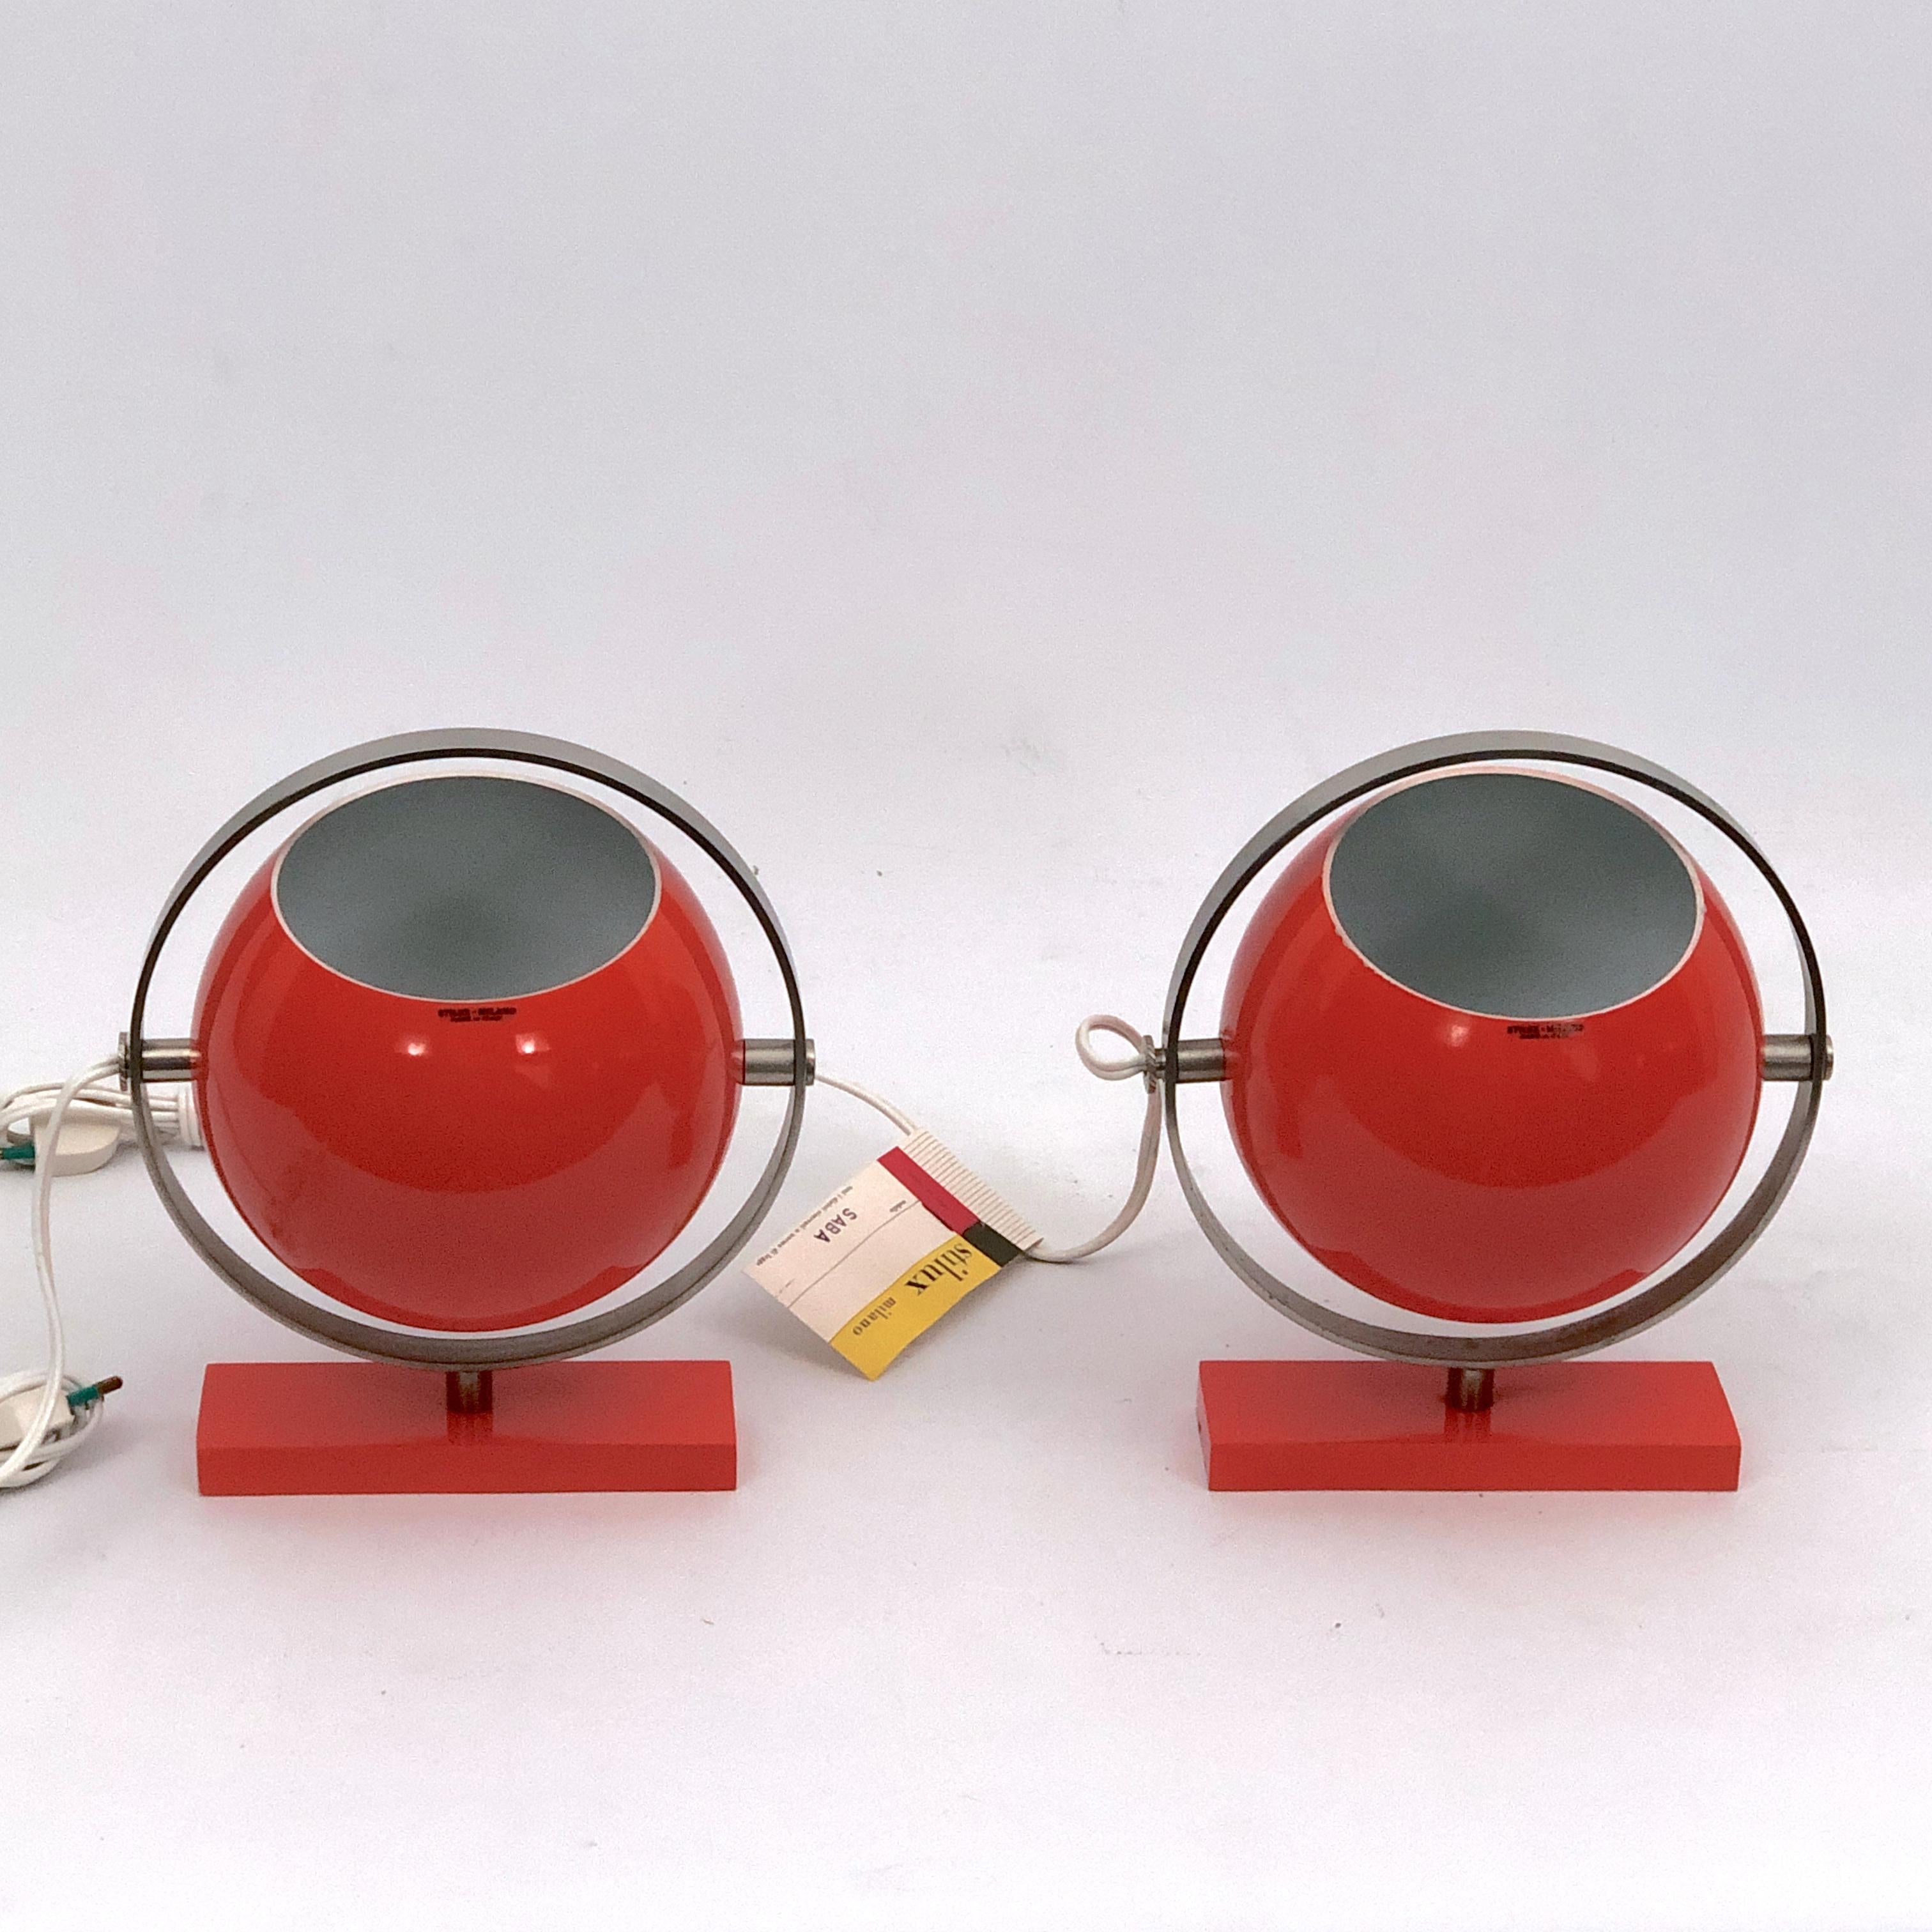 Extremely rare as a pair, orange globe table lamps produced by Stilux Milano during the 60s. Vintage never used with label and original tag. Small loss of lacquer on one lamp as shown in the pictures. Full working with EU standard, adaptable on